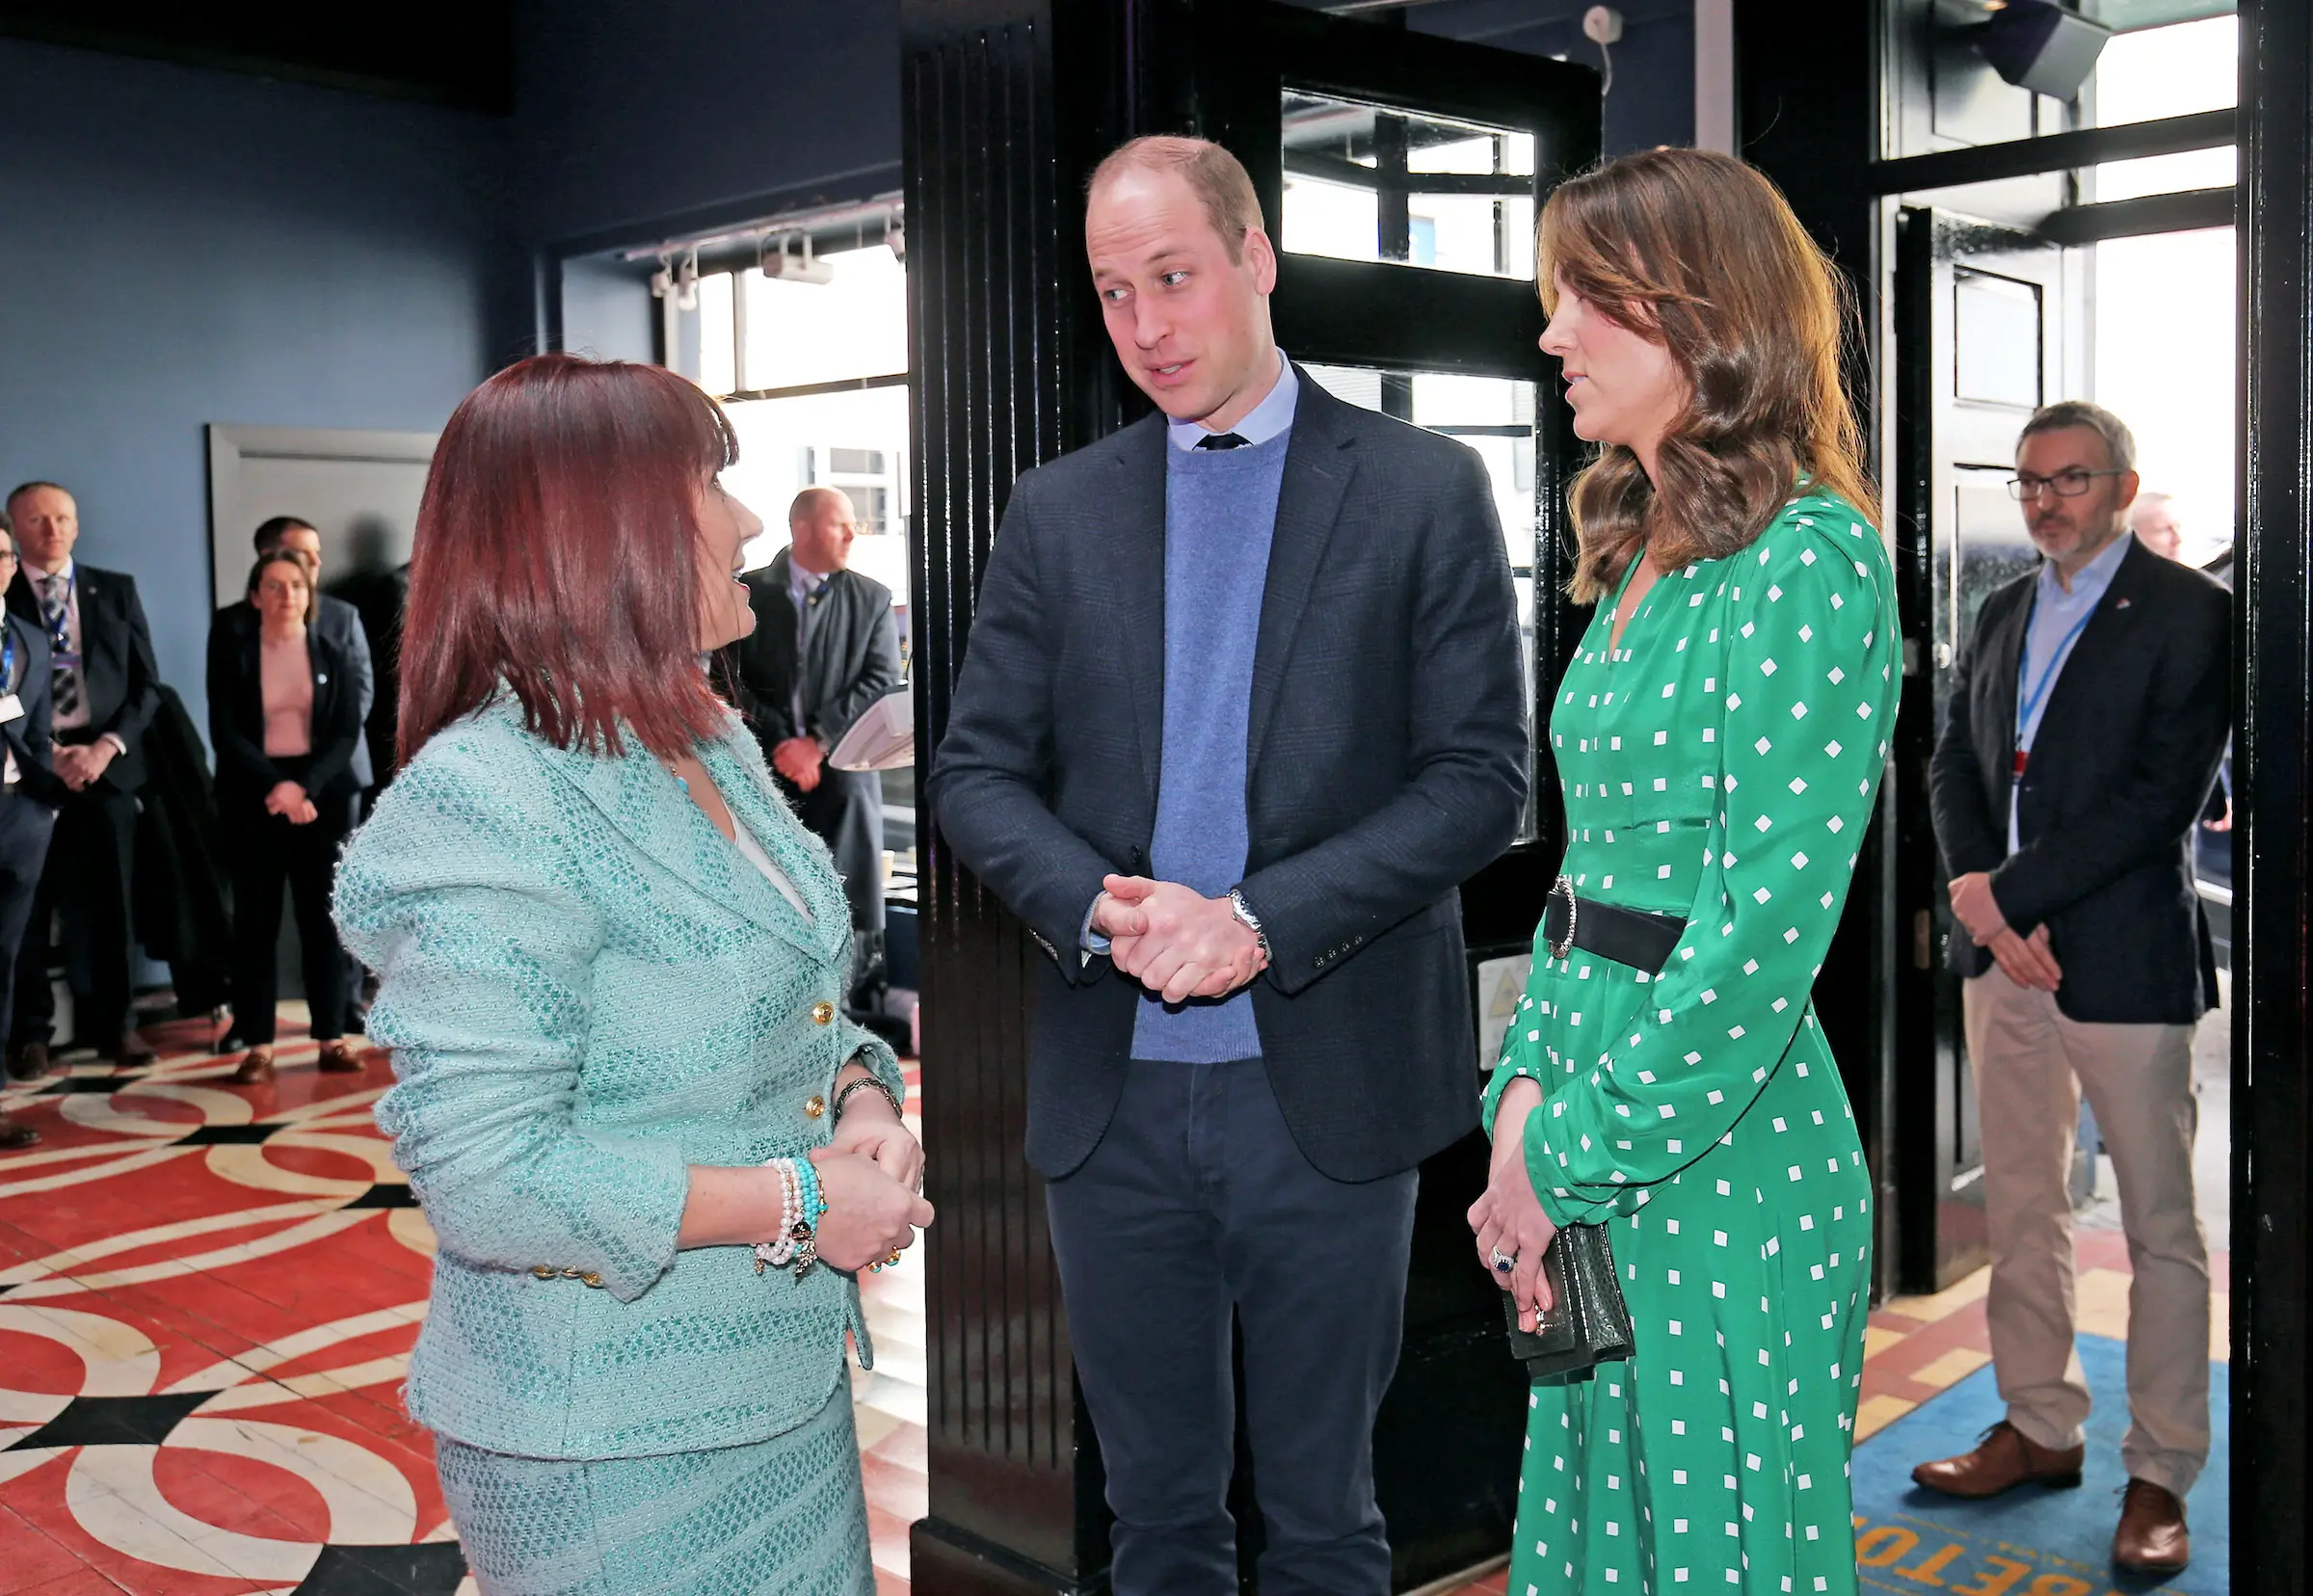 The Duchess of Cambridge came back to Green for the Day 3 of Ireland Visit